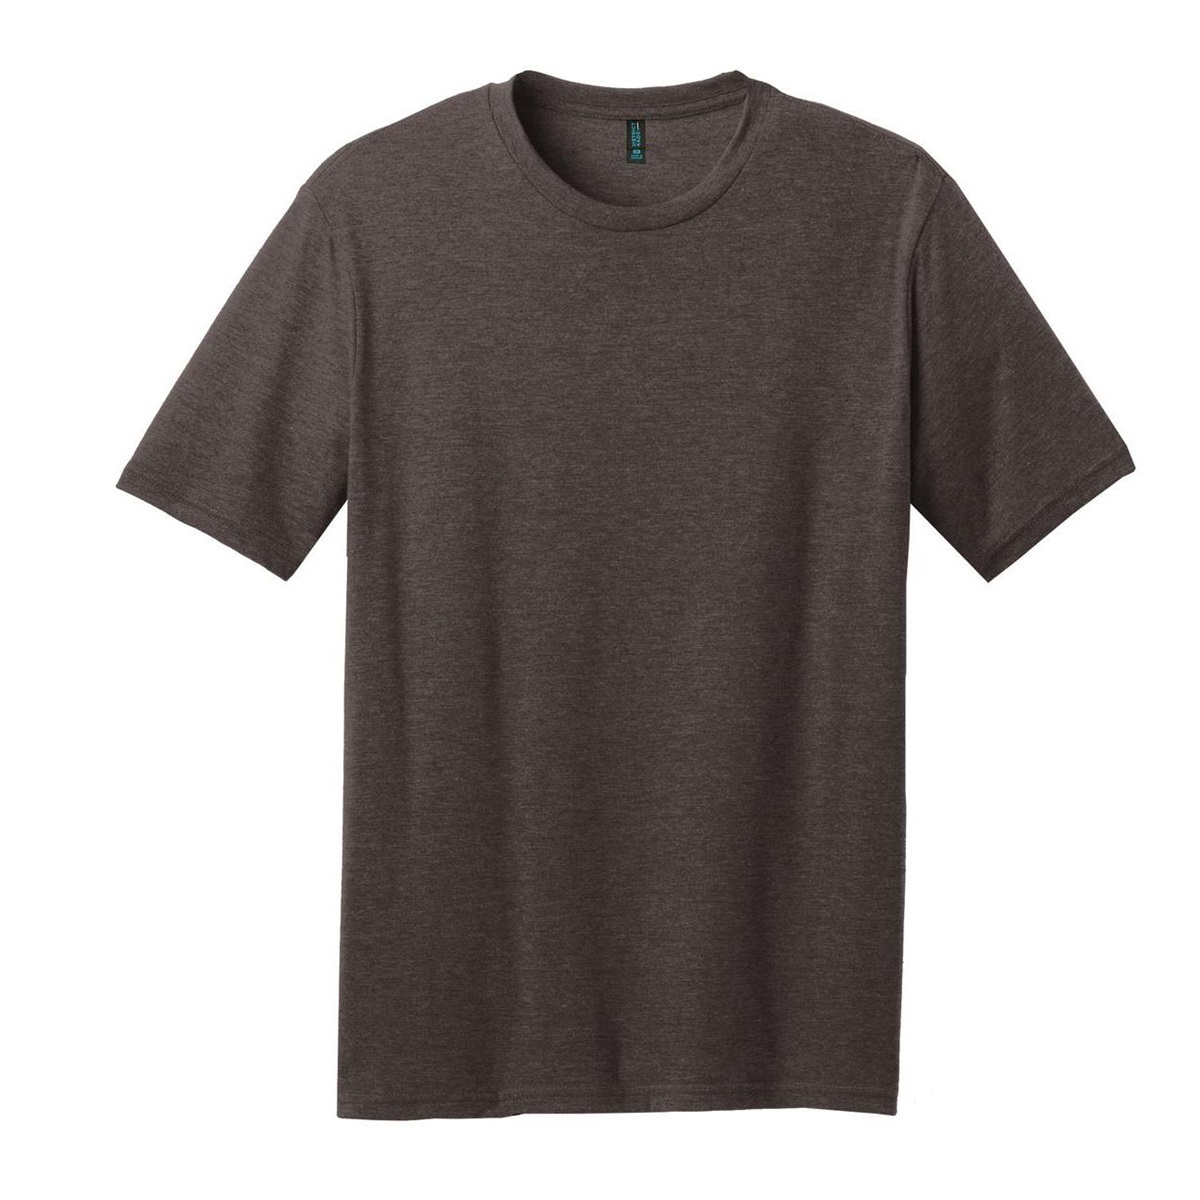 District Made DM108 Mens Perfect Blend Crew Tee - Heathered Brown ...